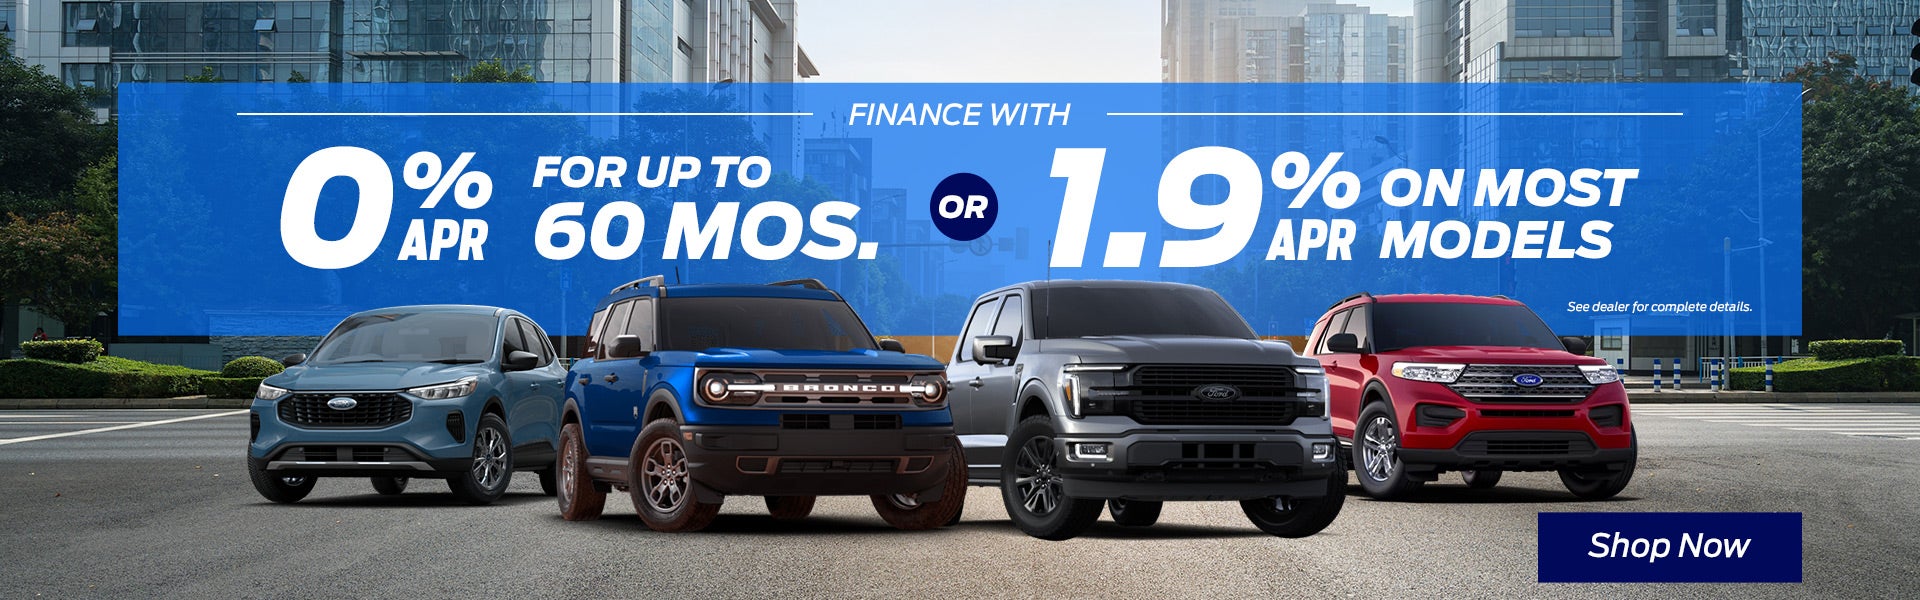 Low APR Offers on Top New Ford Models